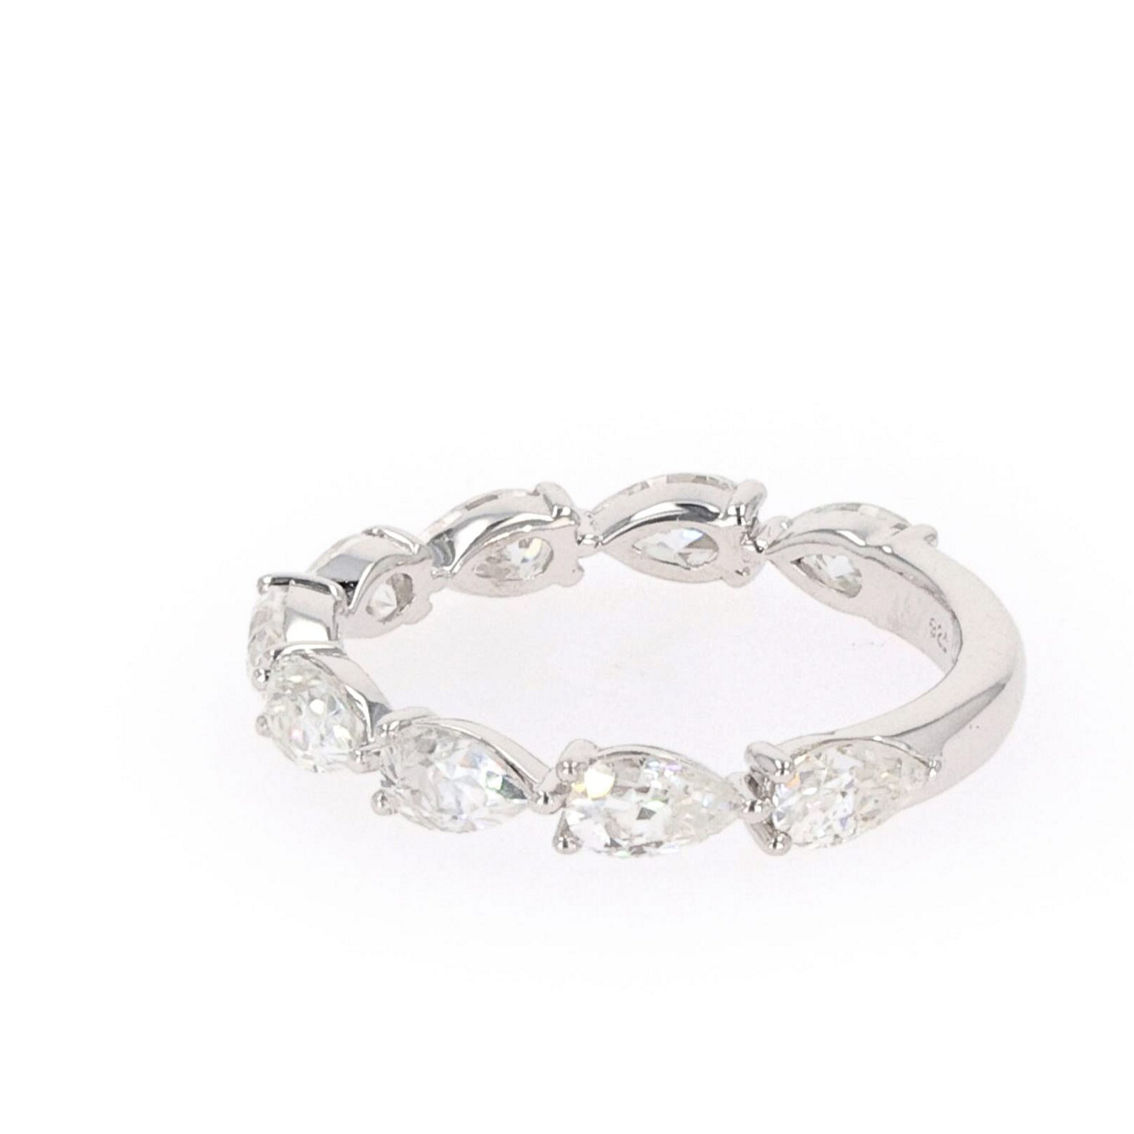 Charles & Colvard 1.89cttw Moissanite Band in Sterling Silver - Image 2 of 5